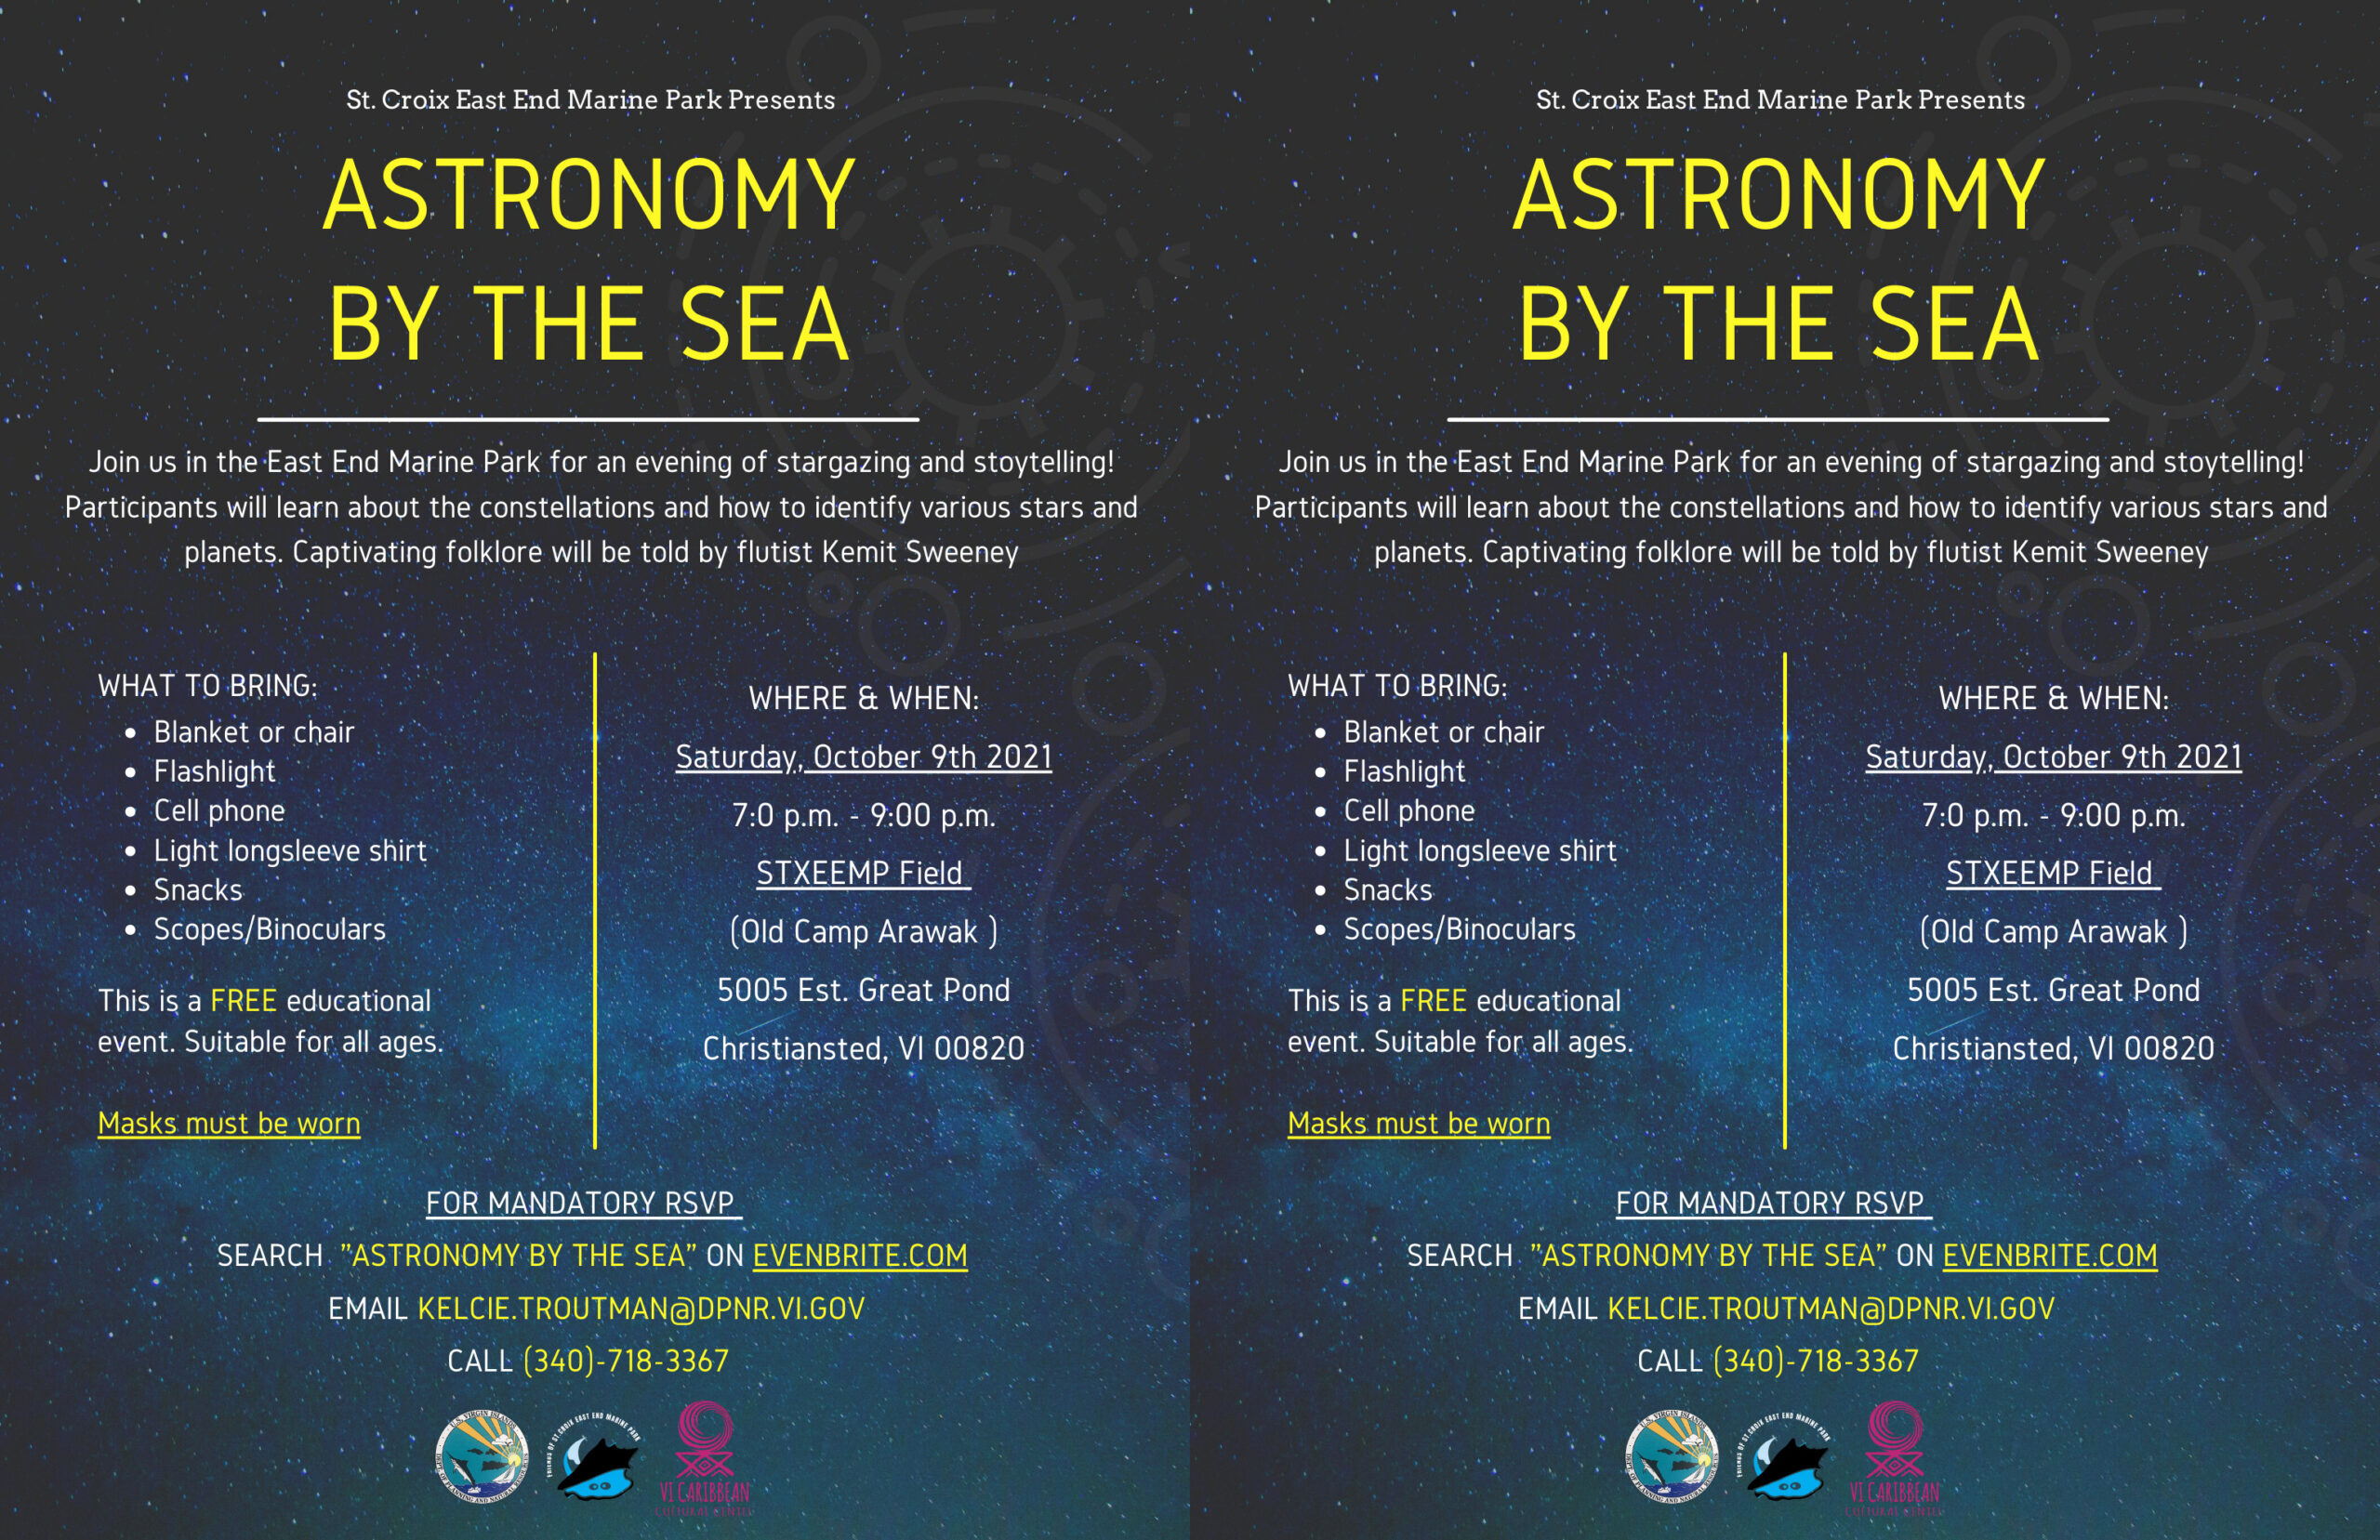 DPNR And Friends Of East End Marine Park To Host Astronomy By The Sea Saturday